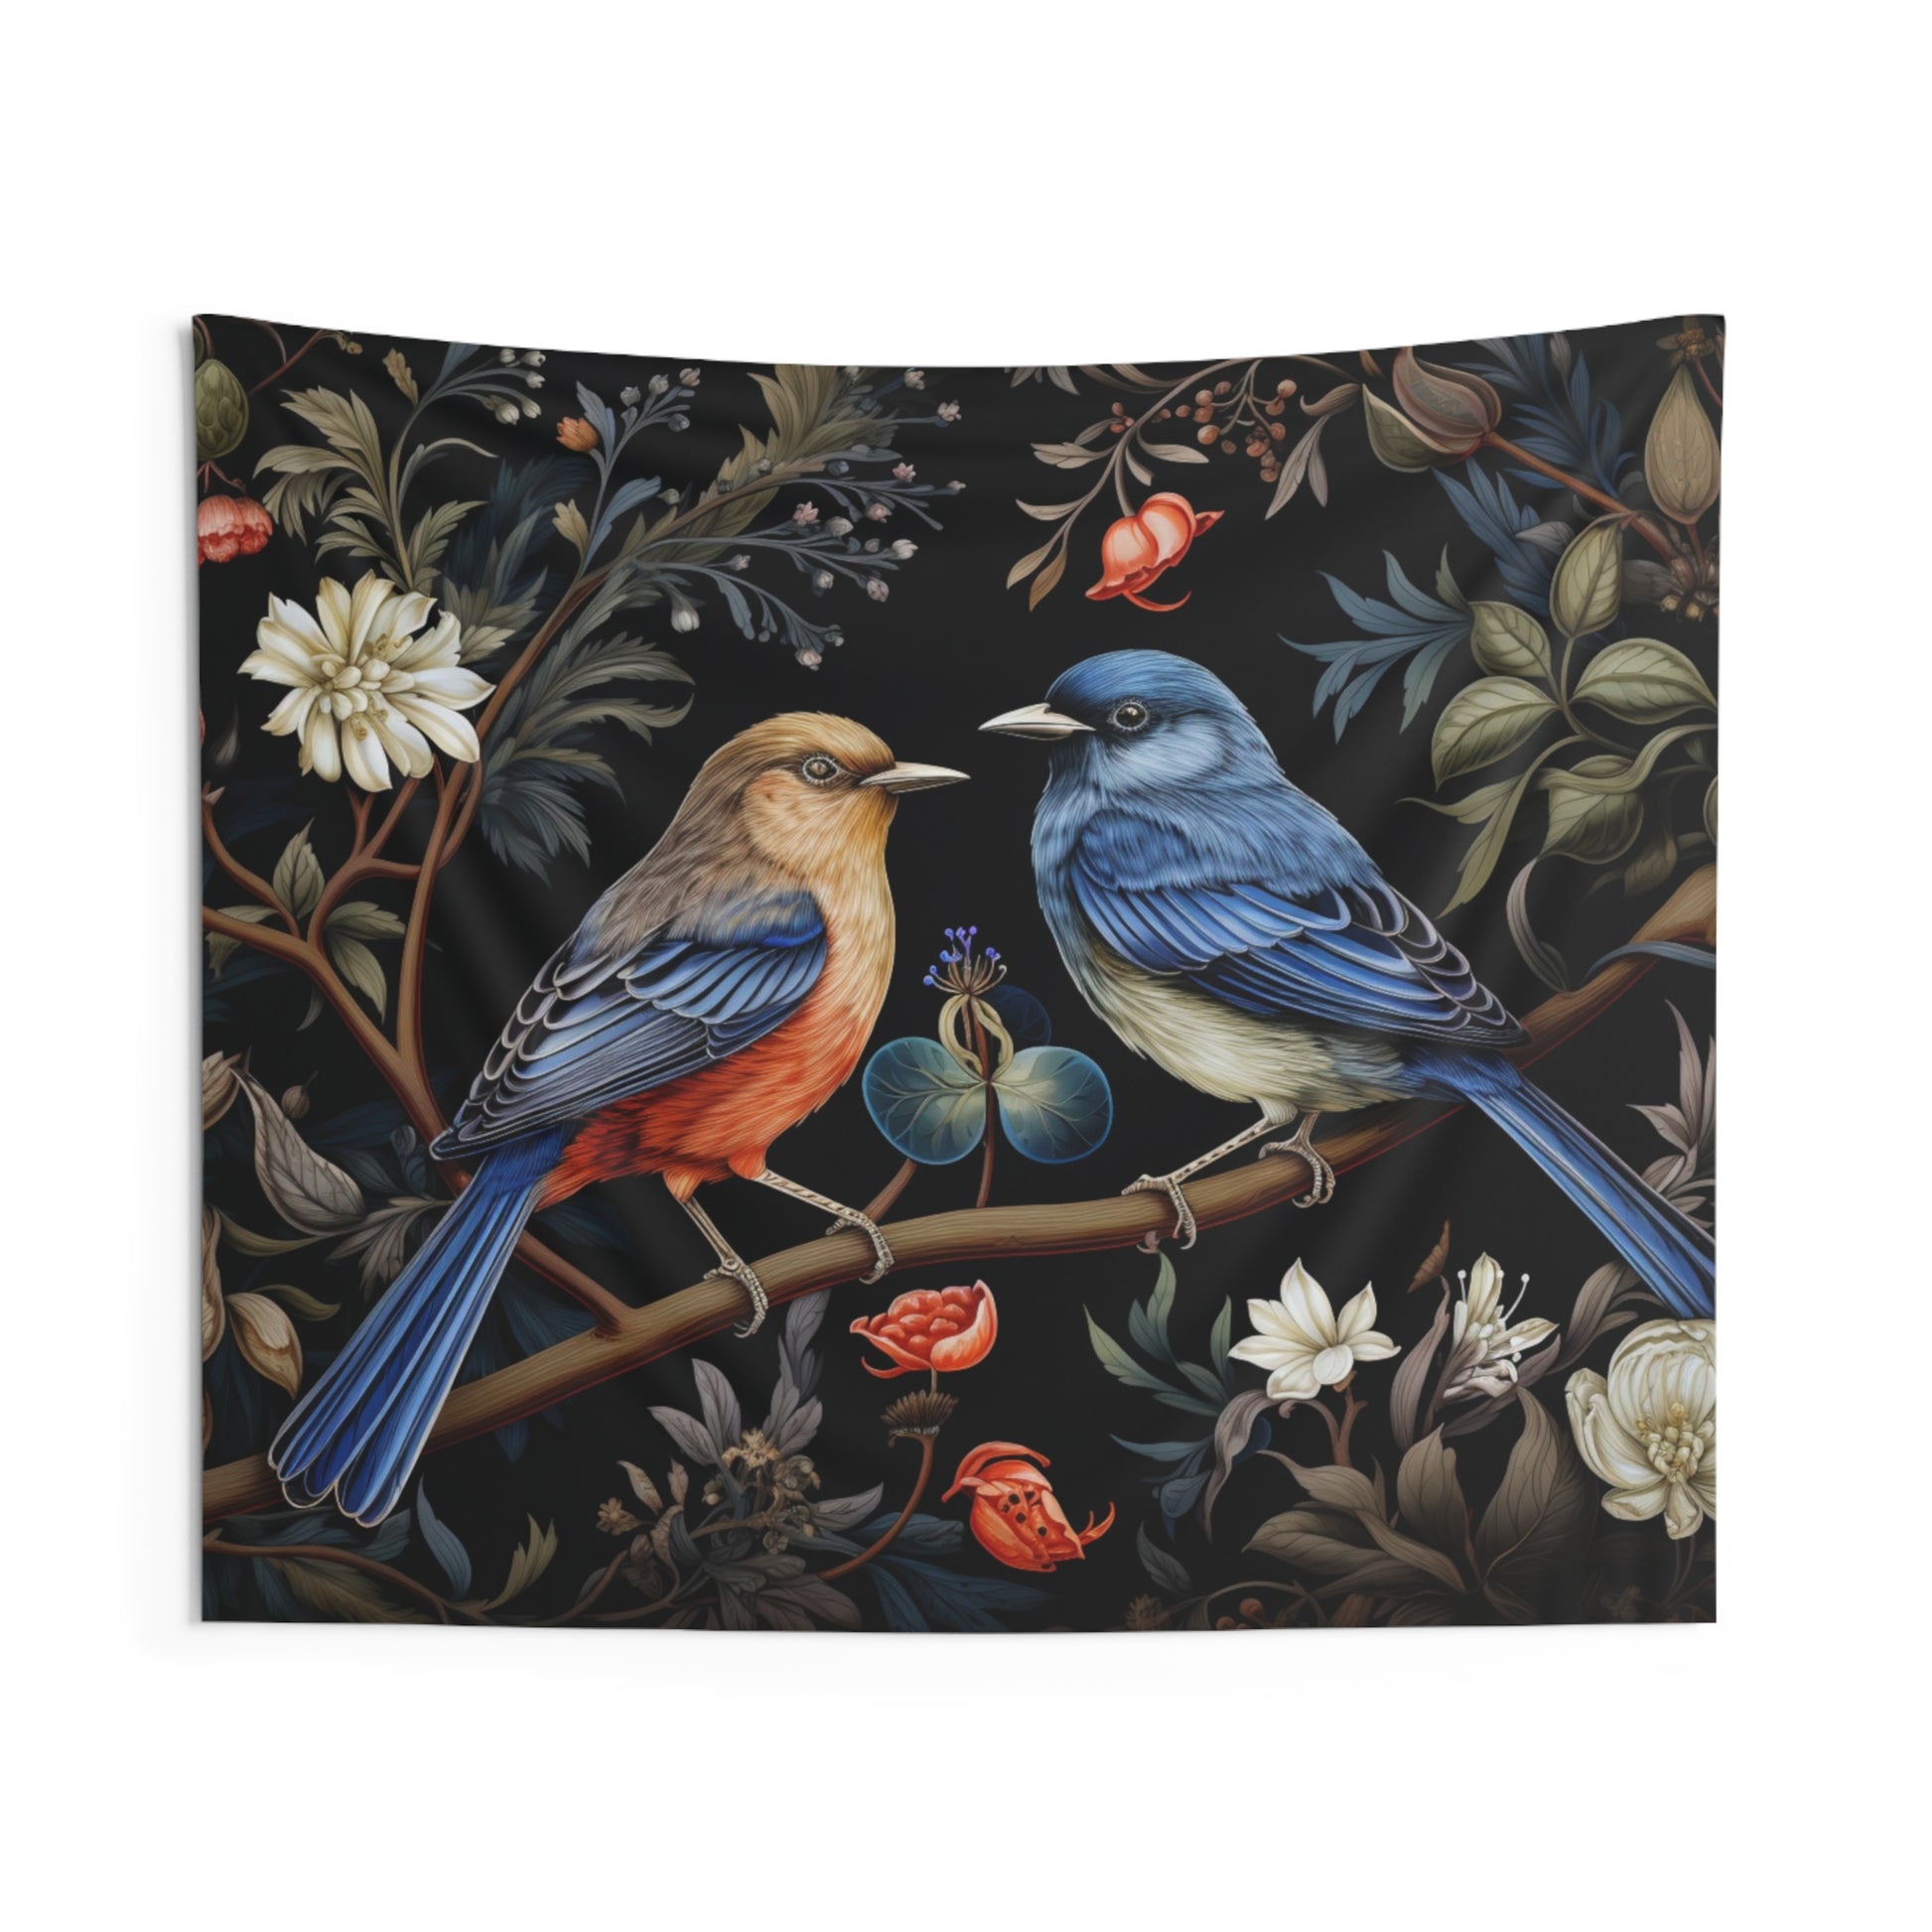 Birds Tapestry, Vintage Floral Nature Wall Art Hanging Cool Unique Landscape Aesthetic Large Small Decor Bedroom College Dorm Room Starcove Fashion